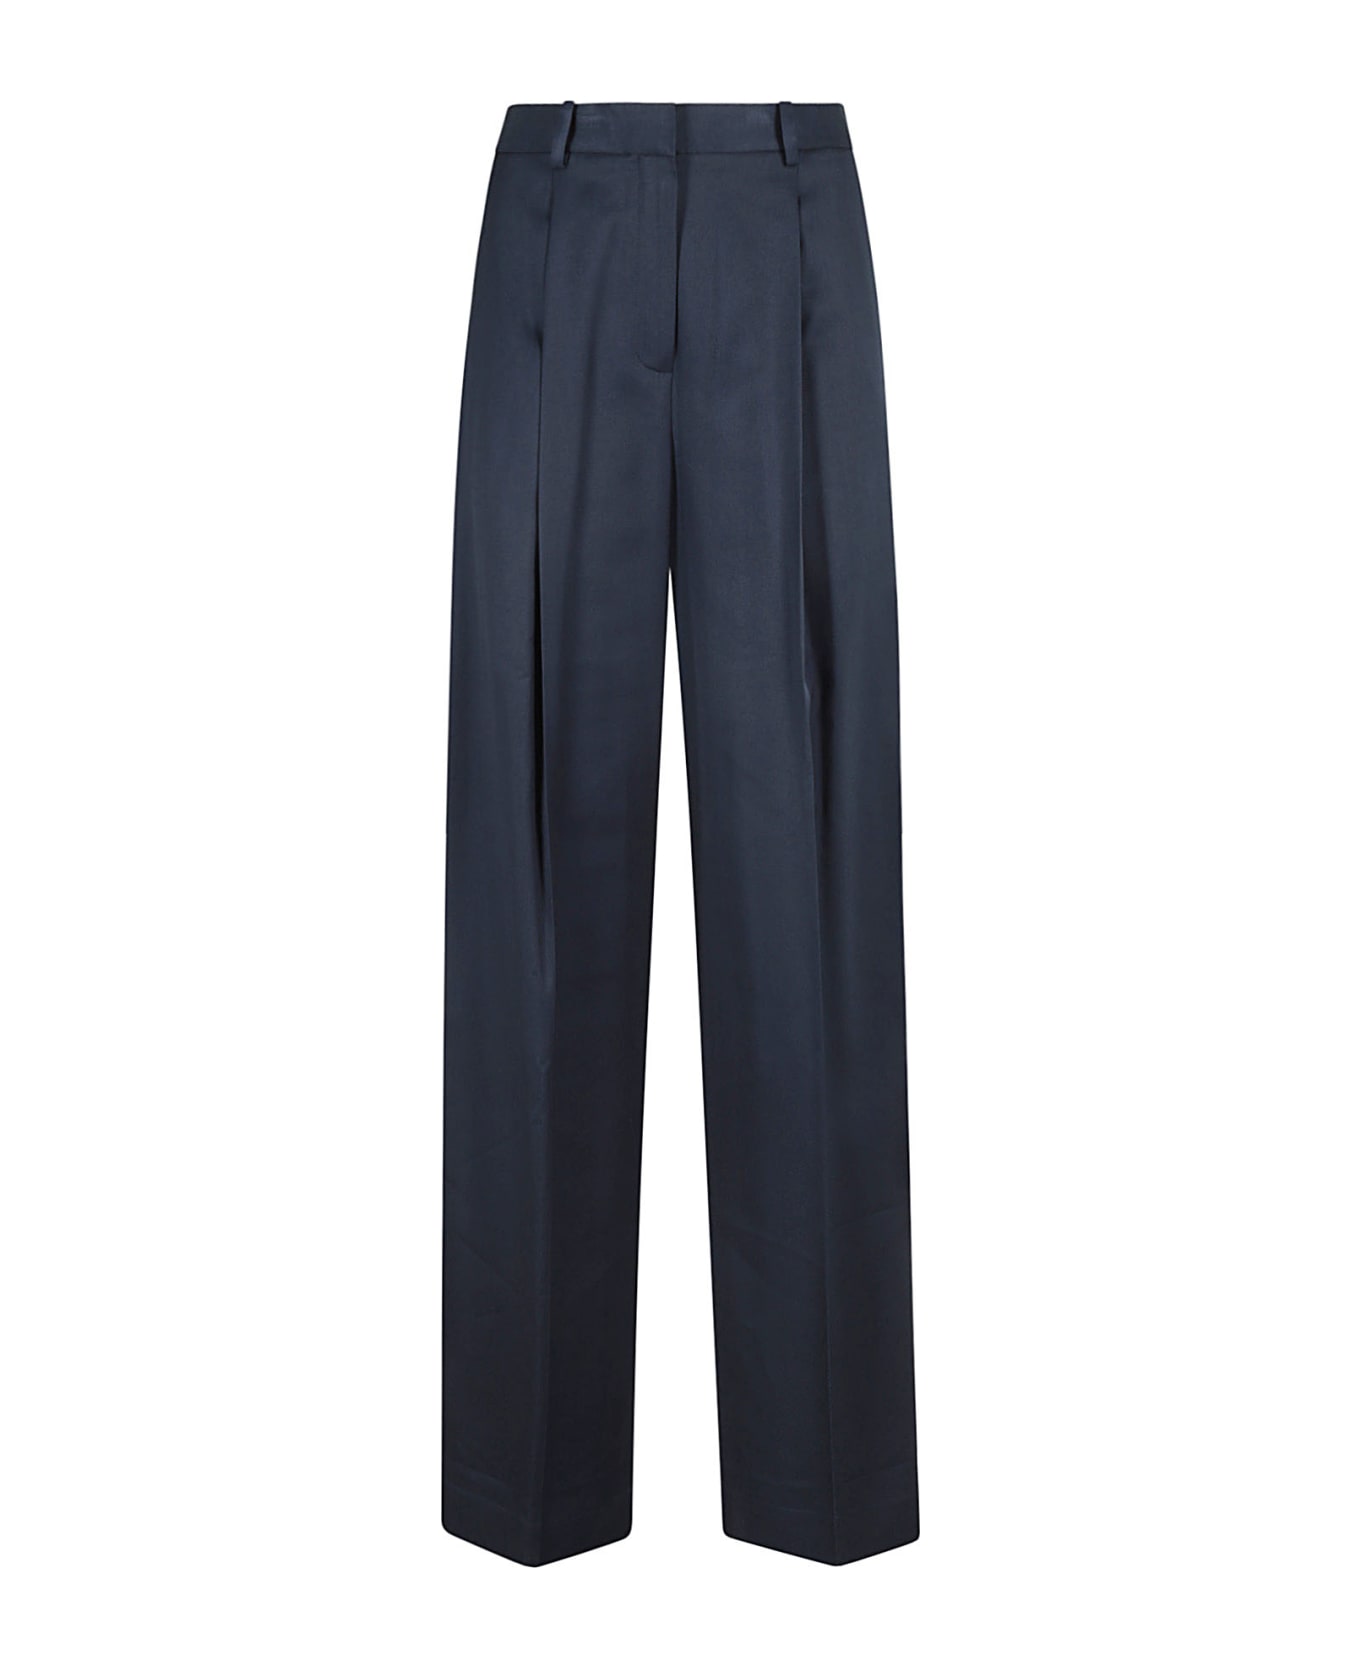 Theory Single Plt Pant - Xlv Nocturne Navy